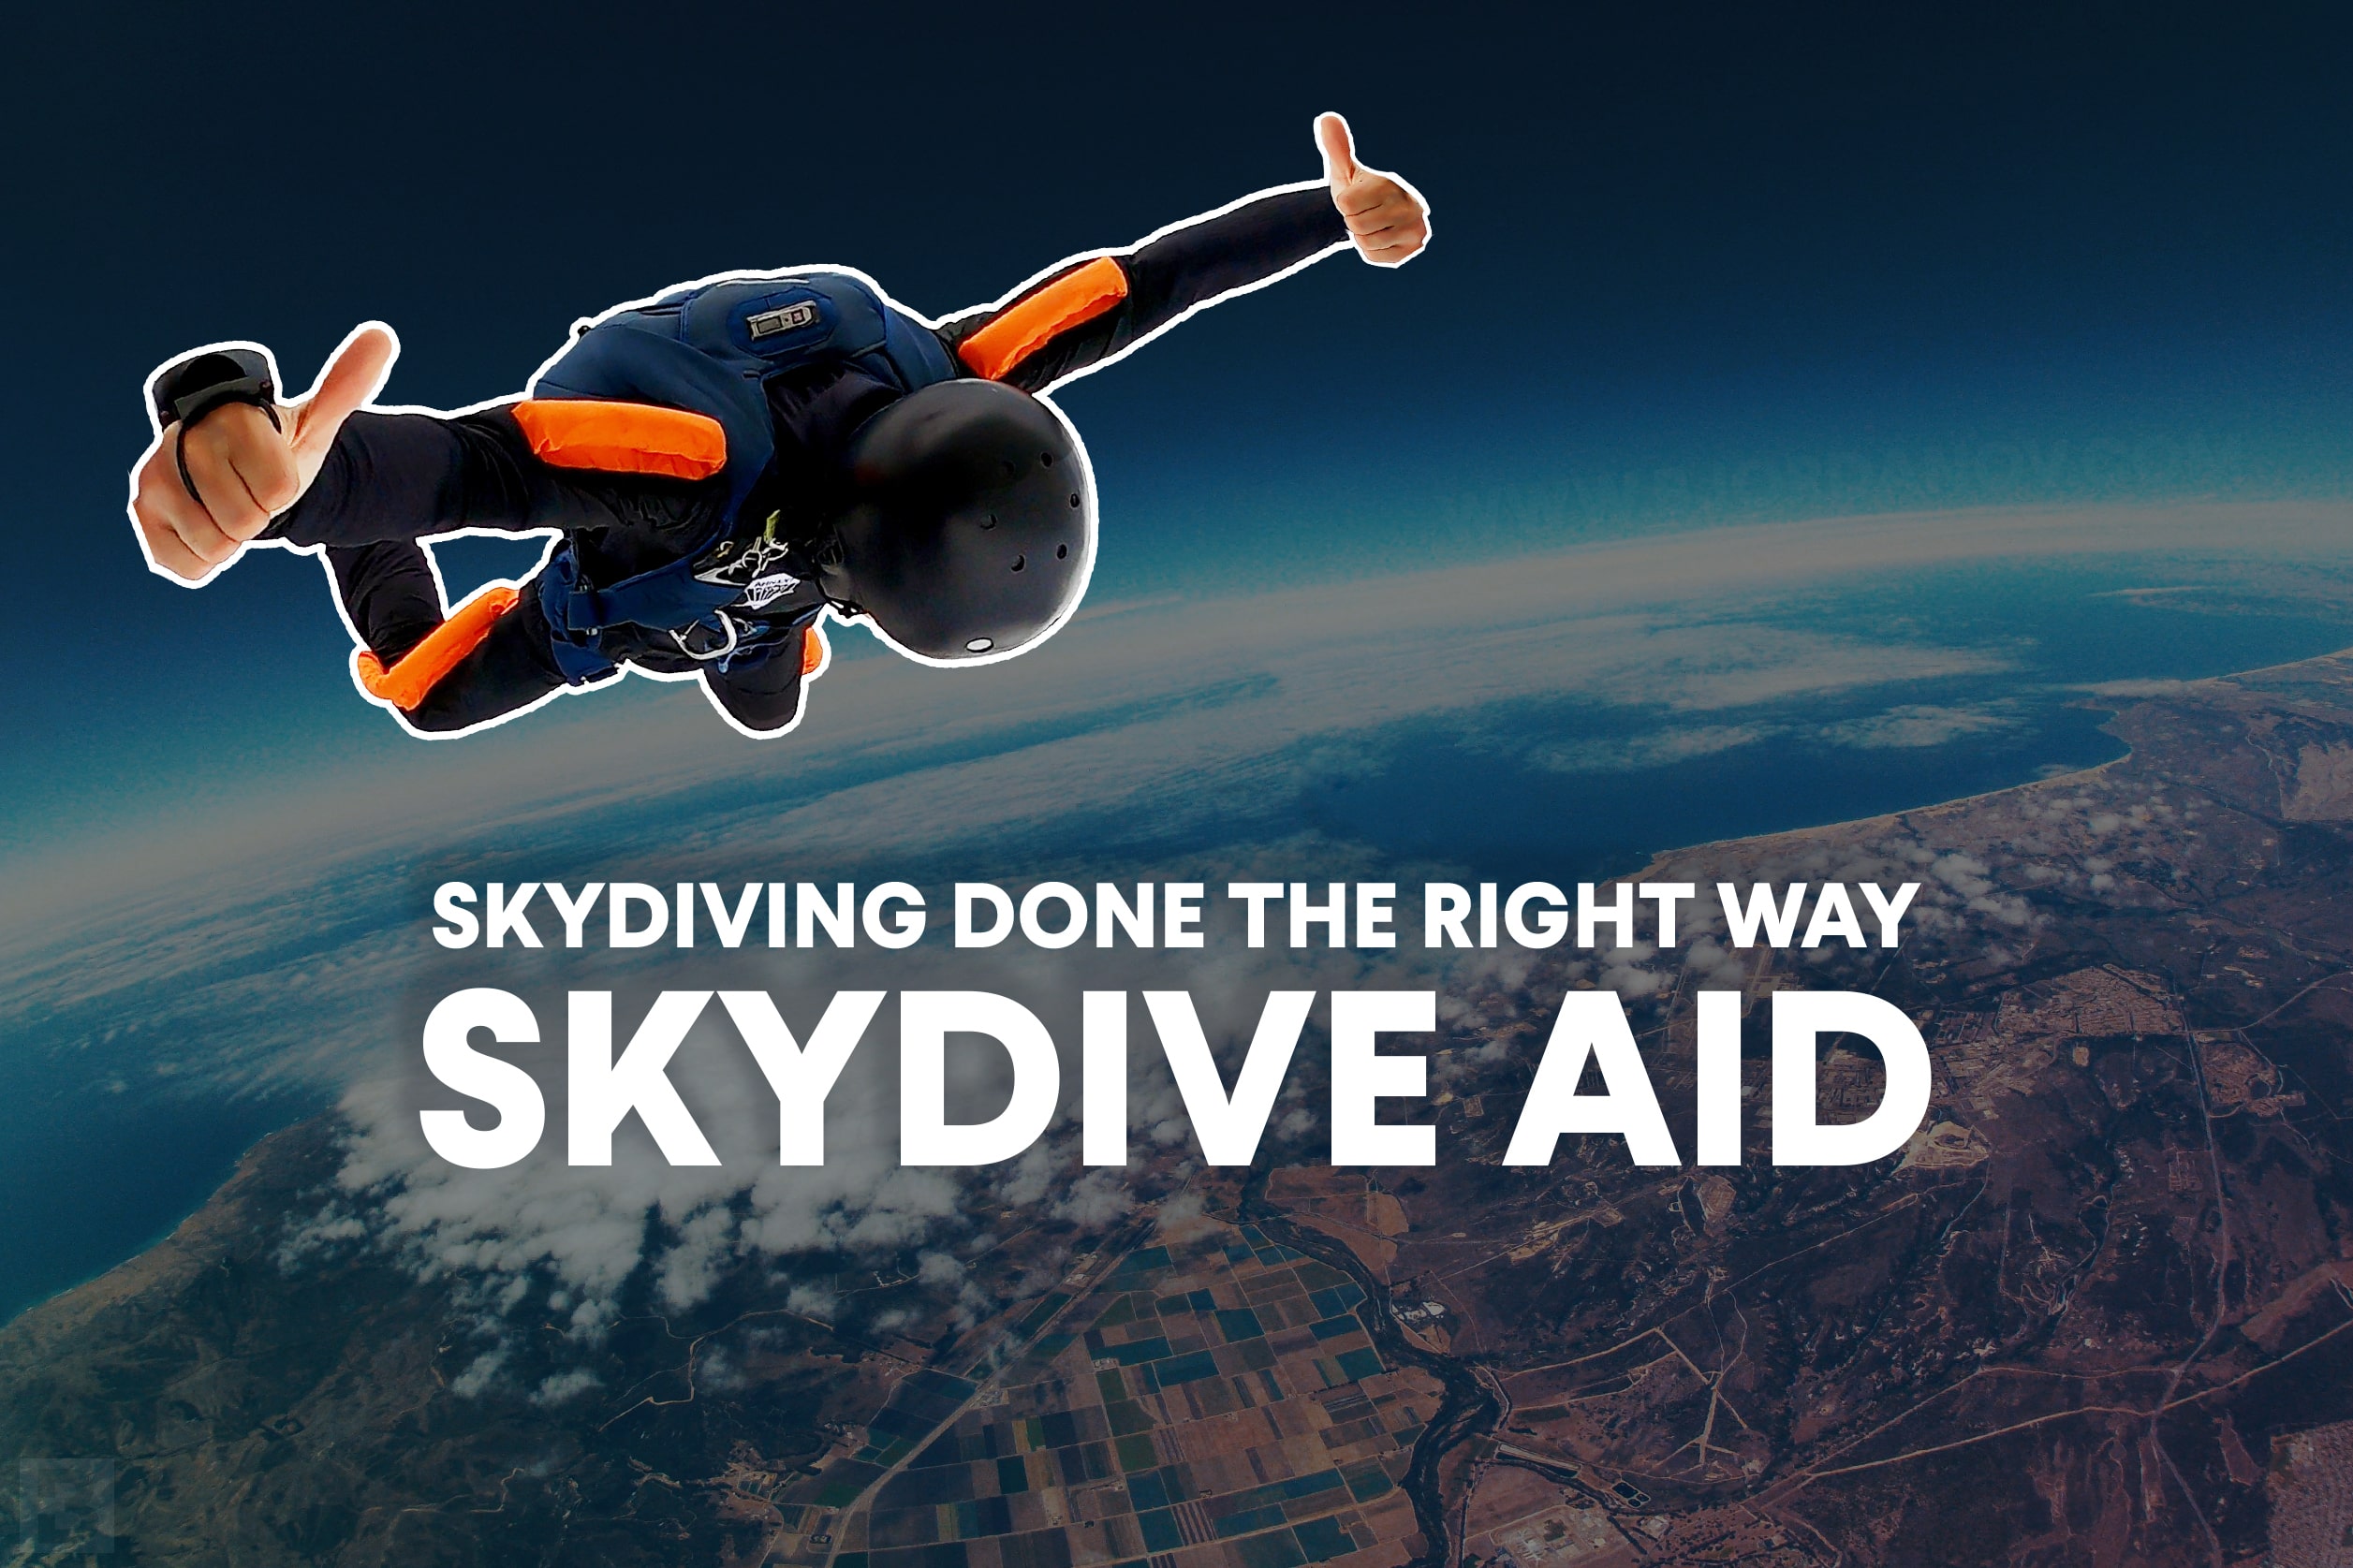 SkyDiving - AID - first jump - no fear